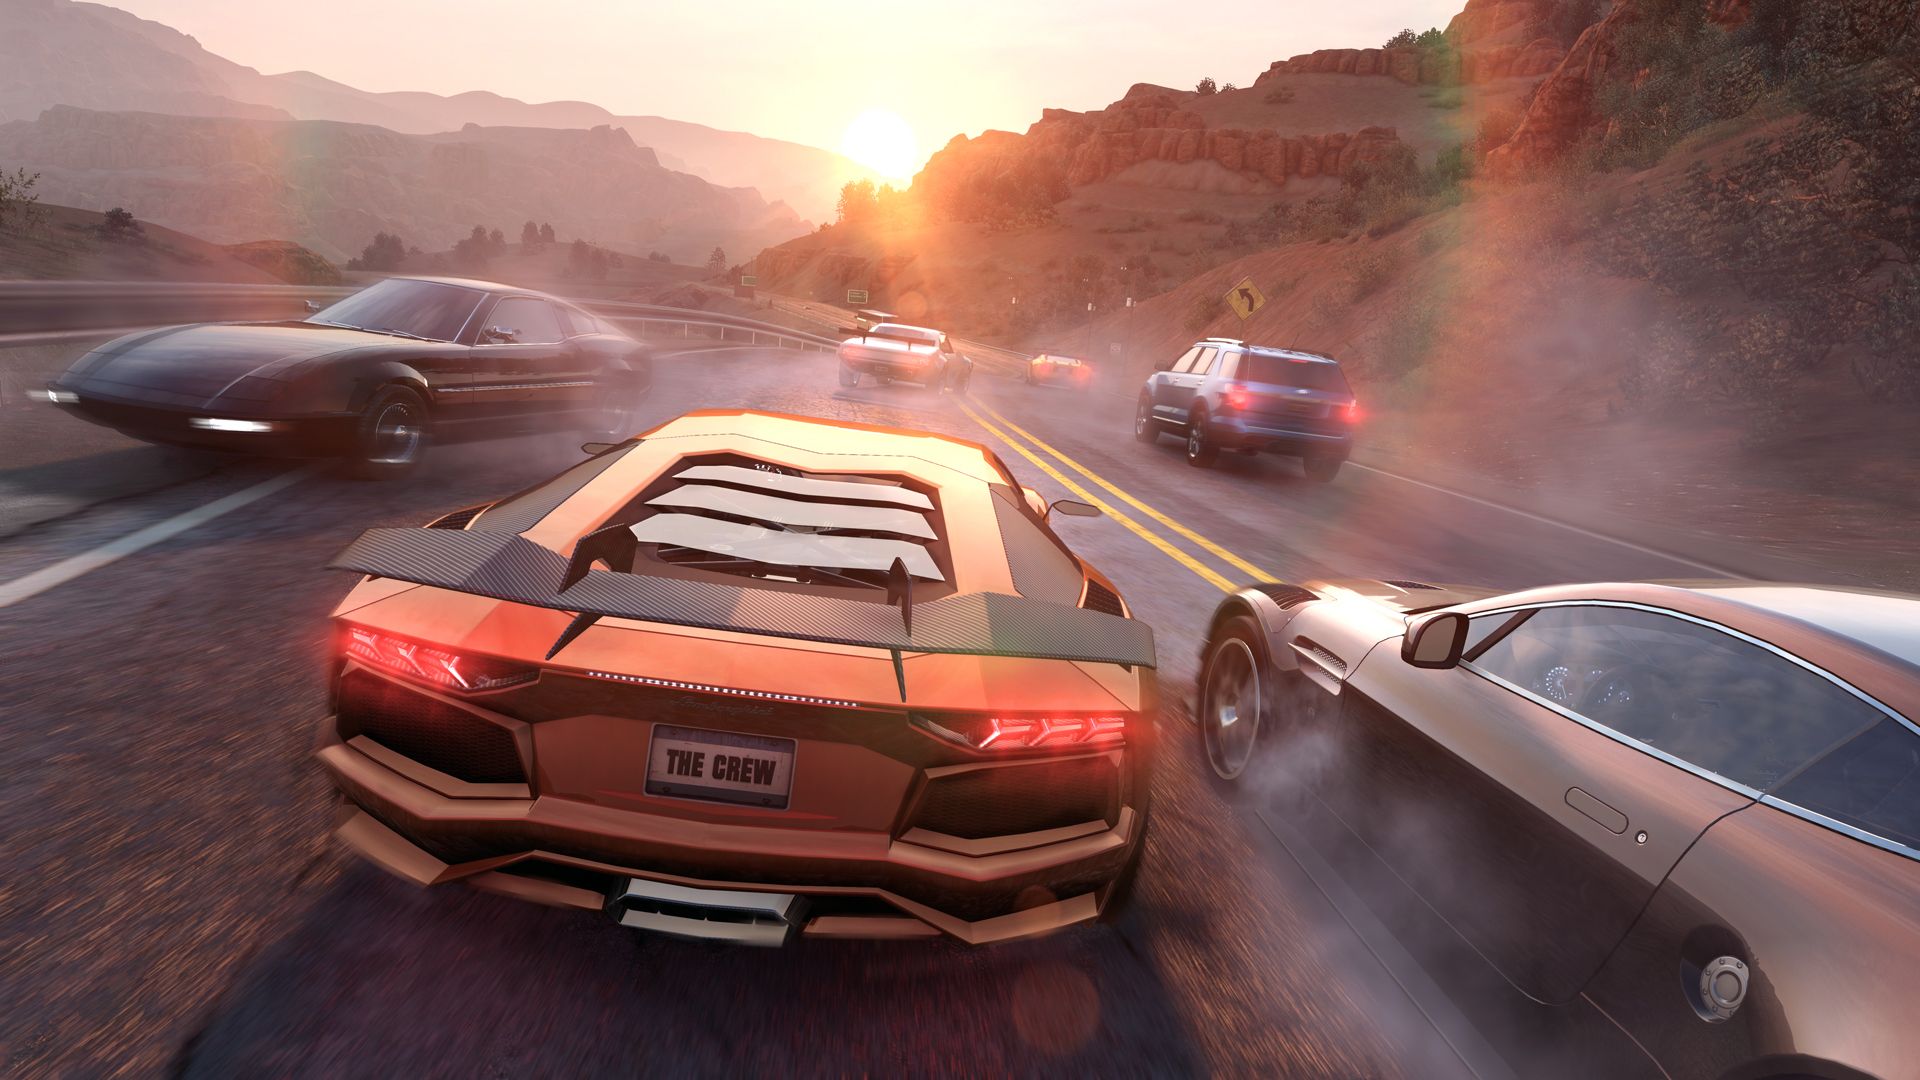 Save 50% on The Crew™ on Steam